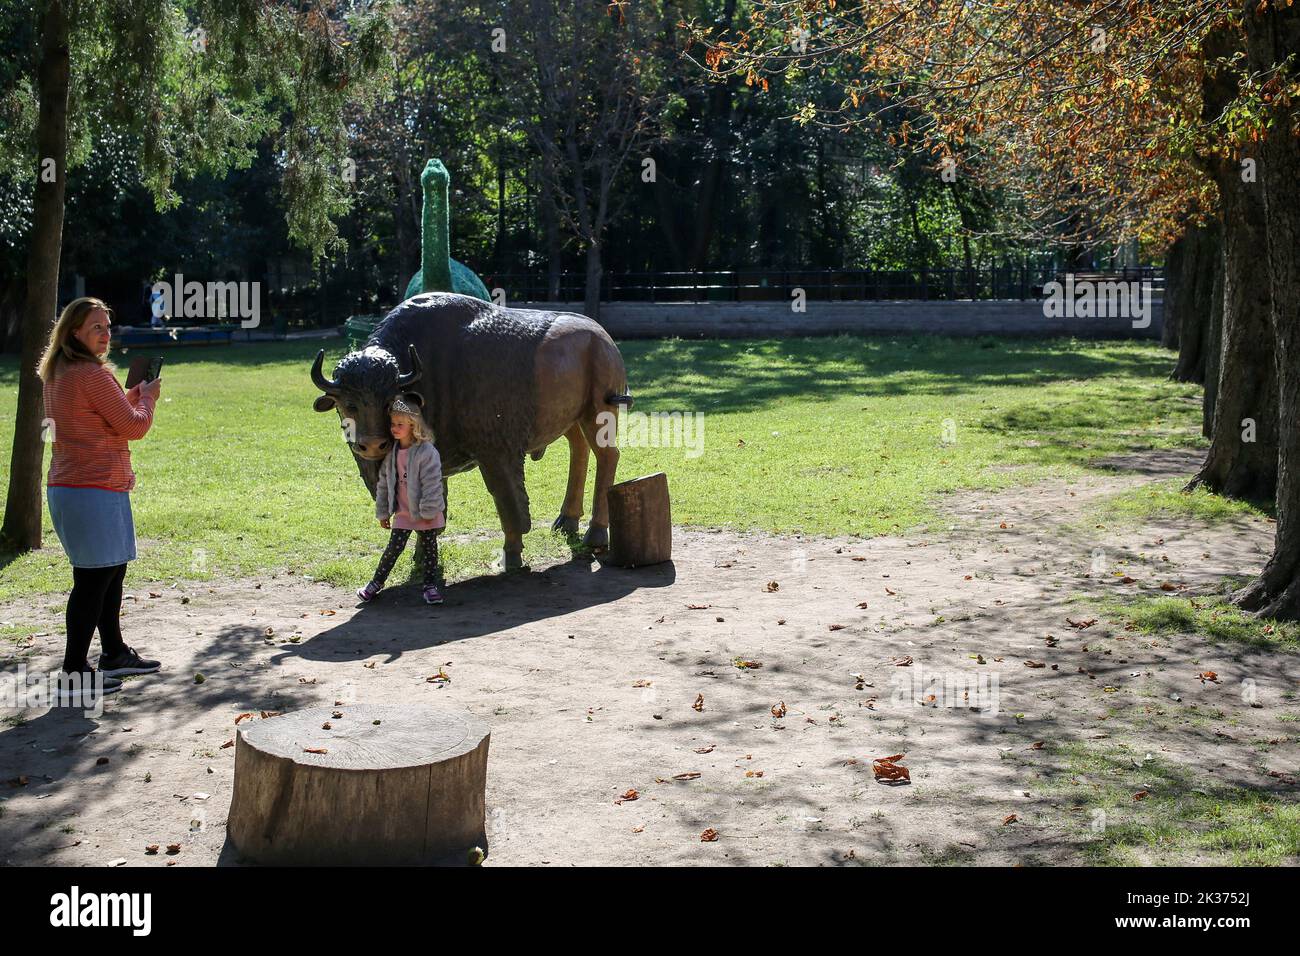 Mother is seen photographing her daughter near the bison figure. One of the oldest in Ukraine, the Odessa Zoo was established in September 1922 In honor of the centenary of the zoo, solemn events were held:1.? memorial plaque was opened to its first director Heinrich Beizert. 2.Ukrposhta issued a special envelope and a stamp. The circulation is limited, only 200 pieces. Stamp cancellation was carried out right at the zoo. 3.Together with the Odessa mayor Gennady Trukhanov, the director of the zoo, Igor Belyakov, opened a new lion cub.In April, a pair of white lions from the Feldman Ecopark in Stock Photo